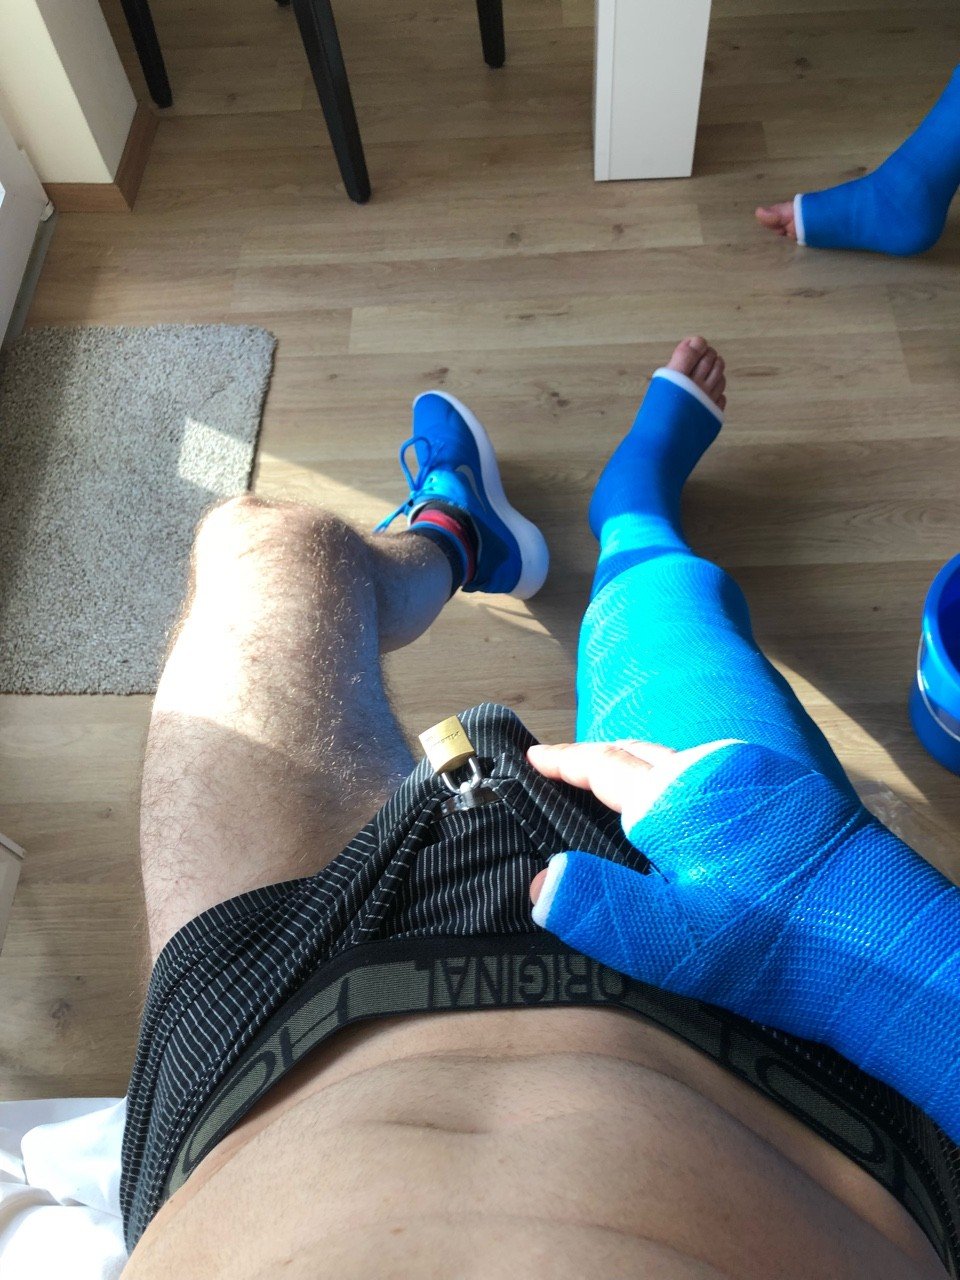 Photo by ampstef with the username @ampstef,  June 22, 2018 at 5:36 AM and the text says 'castmande:

Looking forward to a great weekend with @gayskatercaster and @andrewithcast #brokenleg #brokenarm #chastity #gayfetish #sneakers #brokenfoot #brokenhand #gips #platre #gesso #yeso'